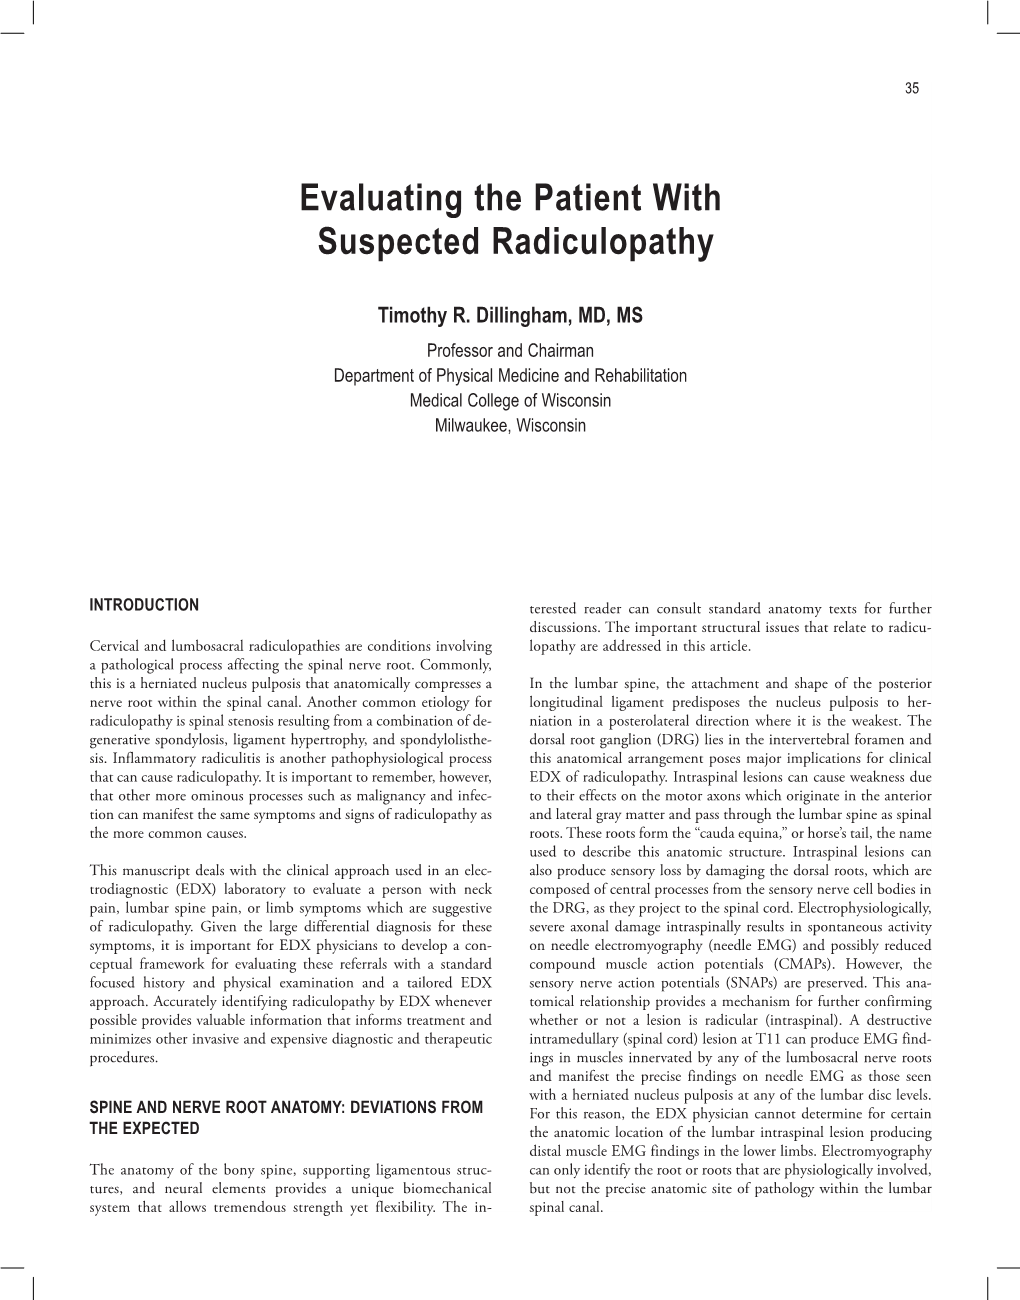 Evaluating the Patient with Suspected Radiculopathy